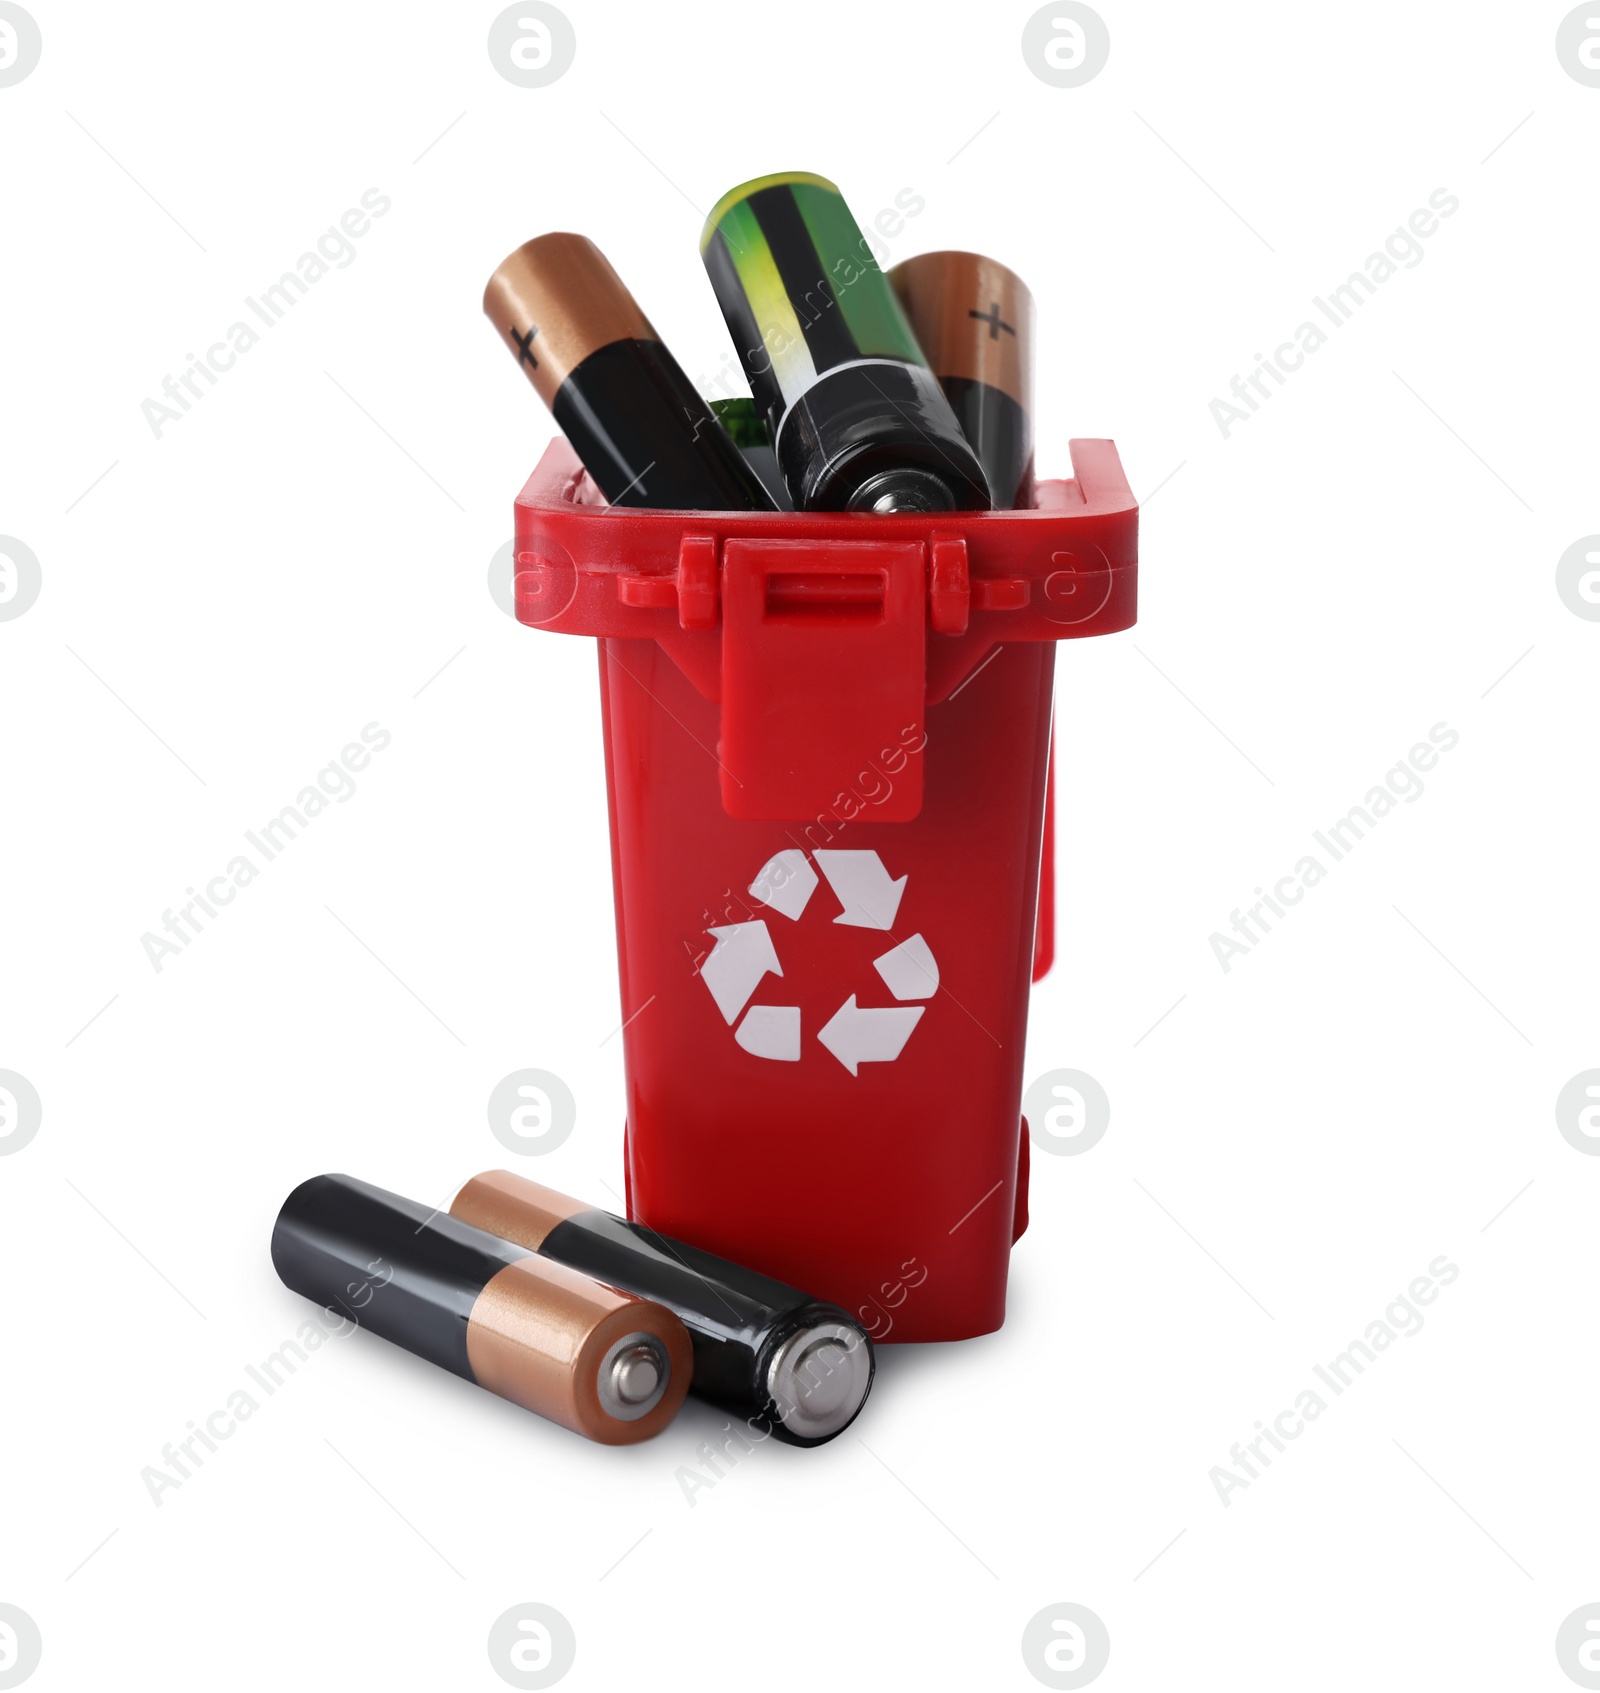 Image of Used batteries in recycling bin on white background